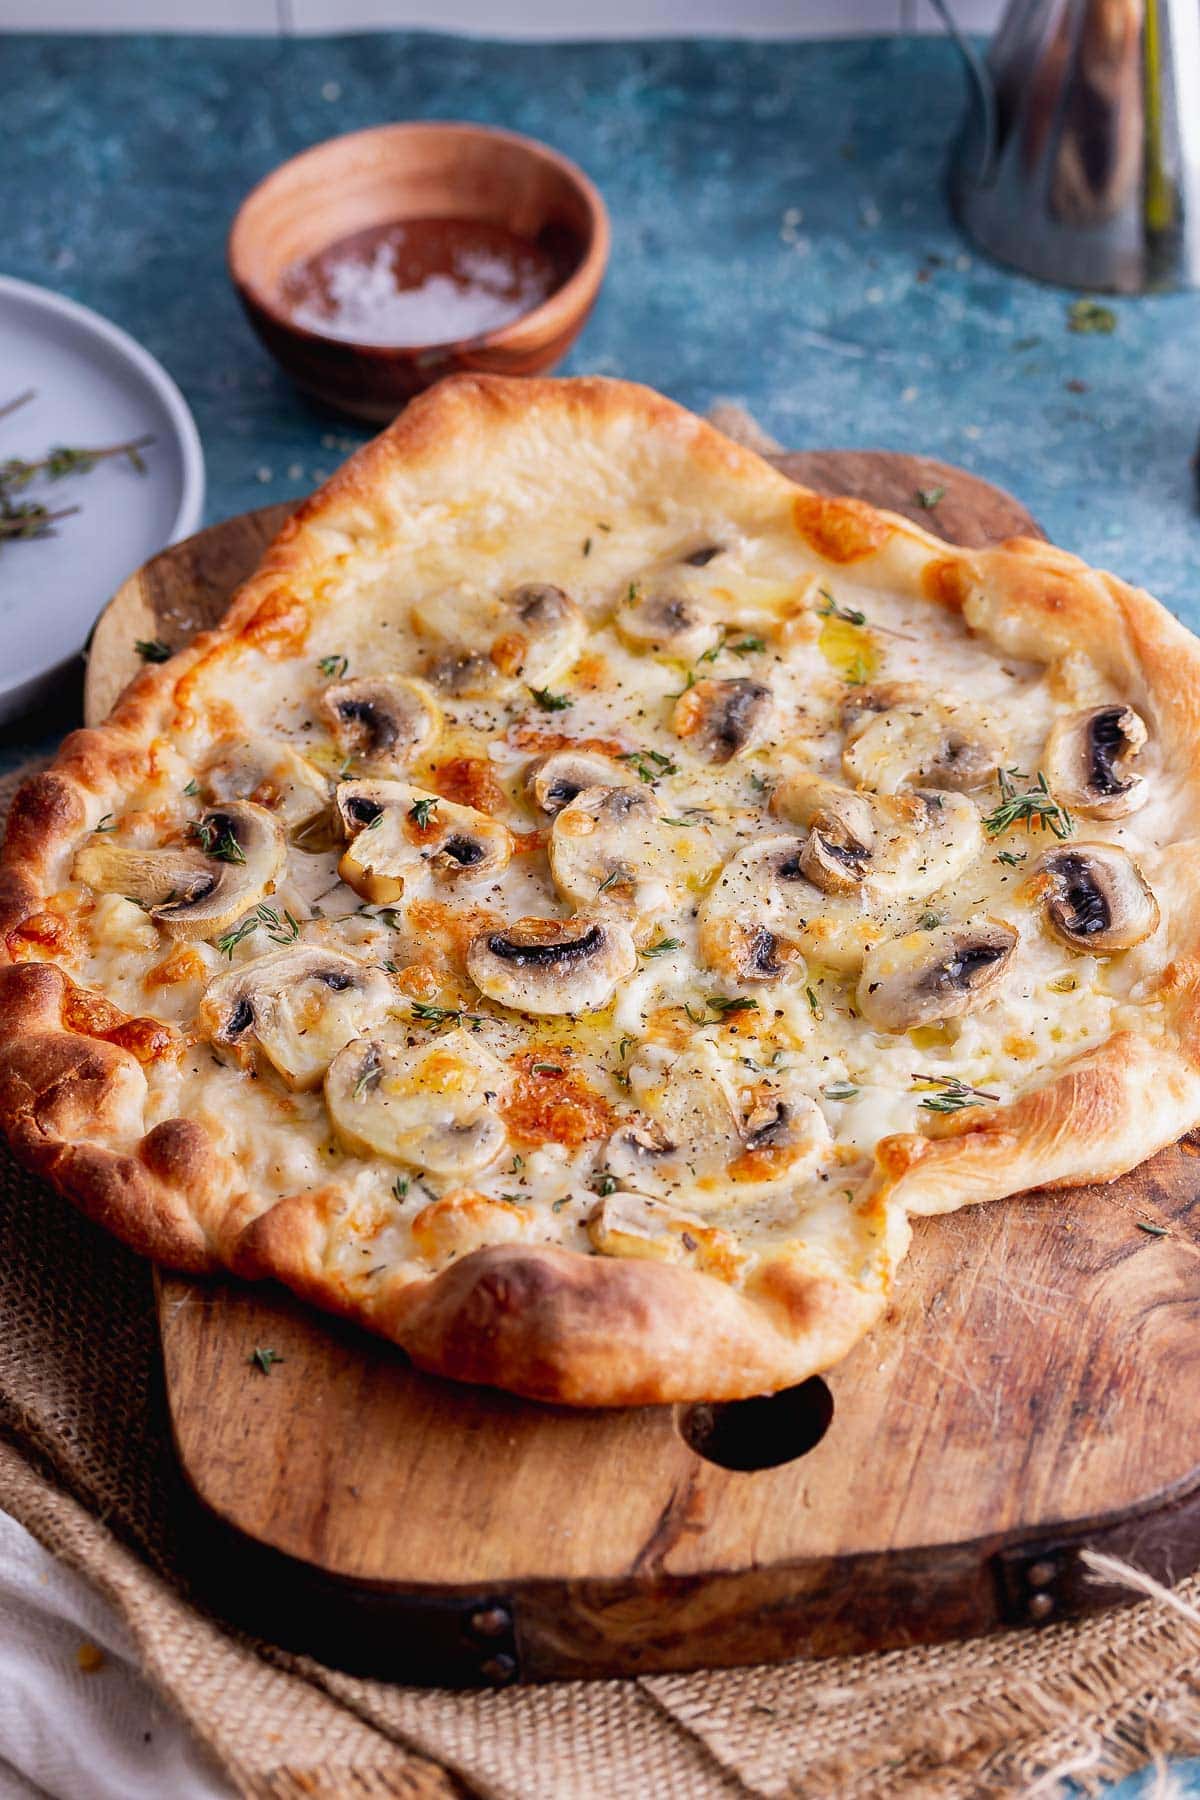 Skillet pizza with mushroom on a wooden board